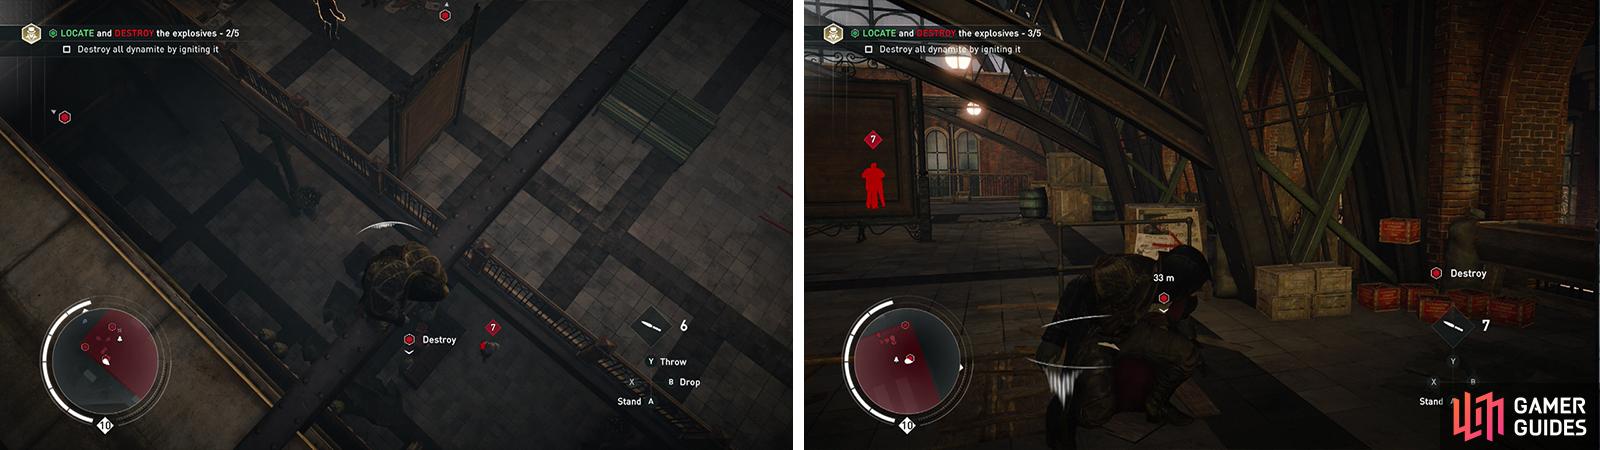 Air assassinate the guard by the third crate (left) before destroying it. Wait for the Sniper to investigate the explosion before approaching the fourth crate (right).